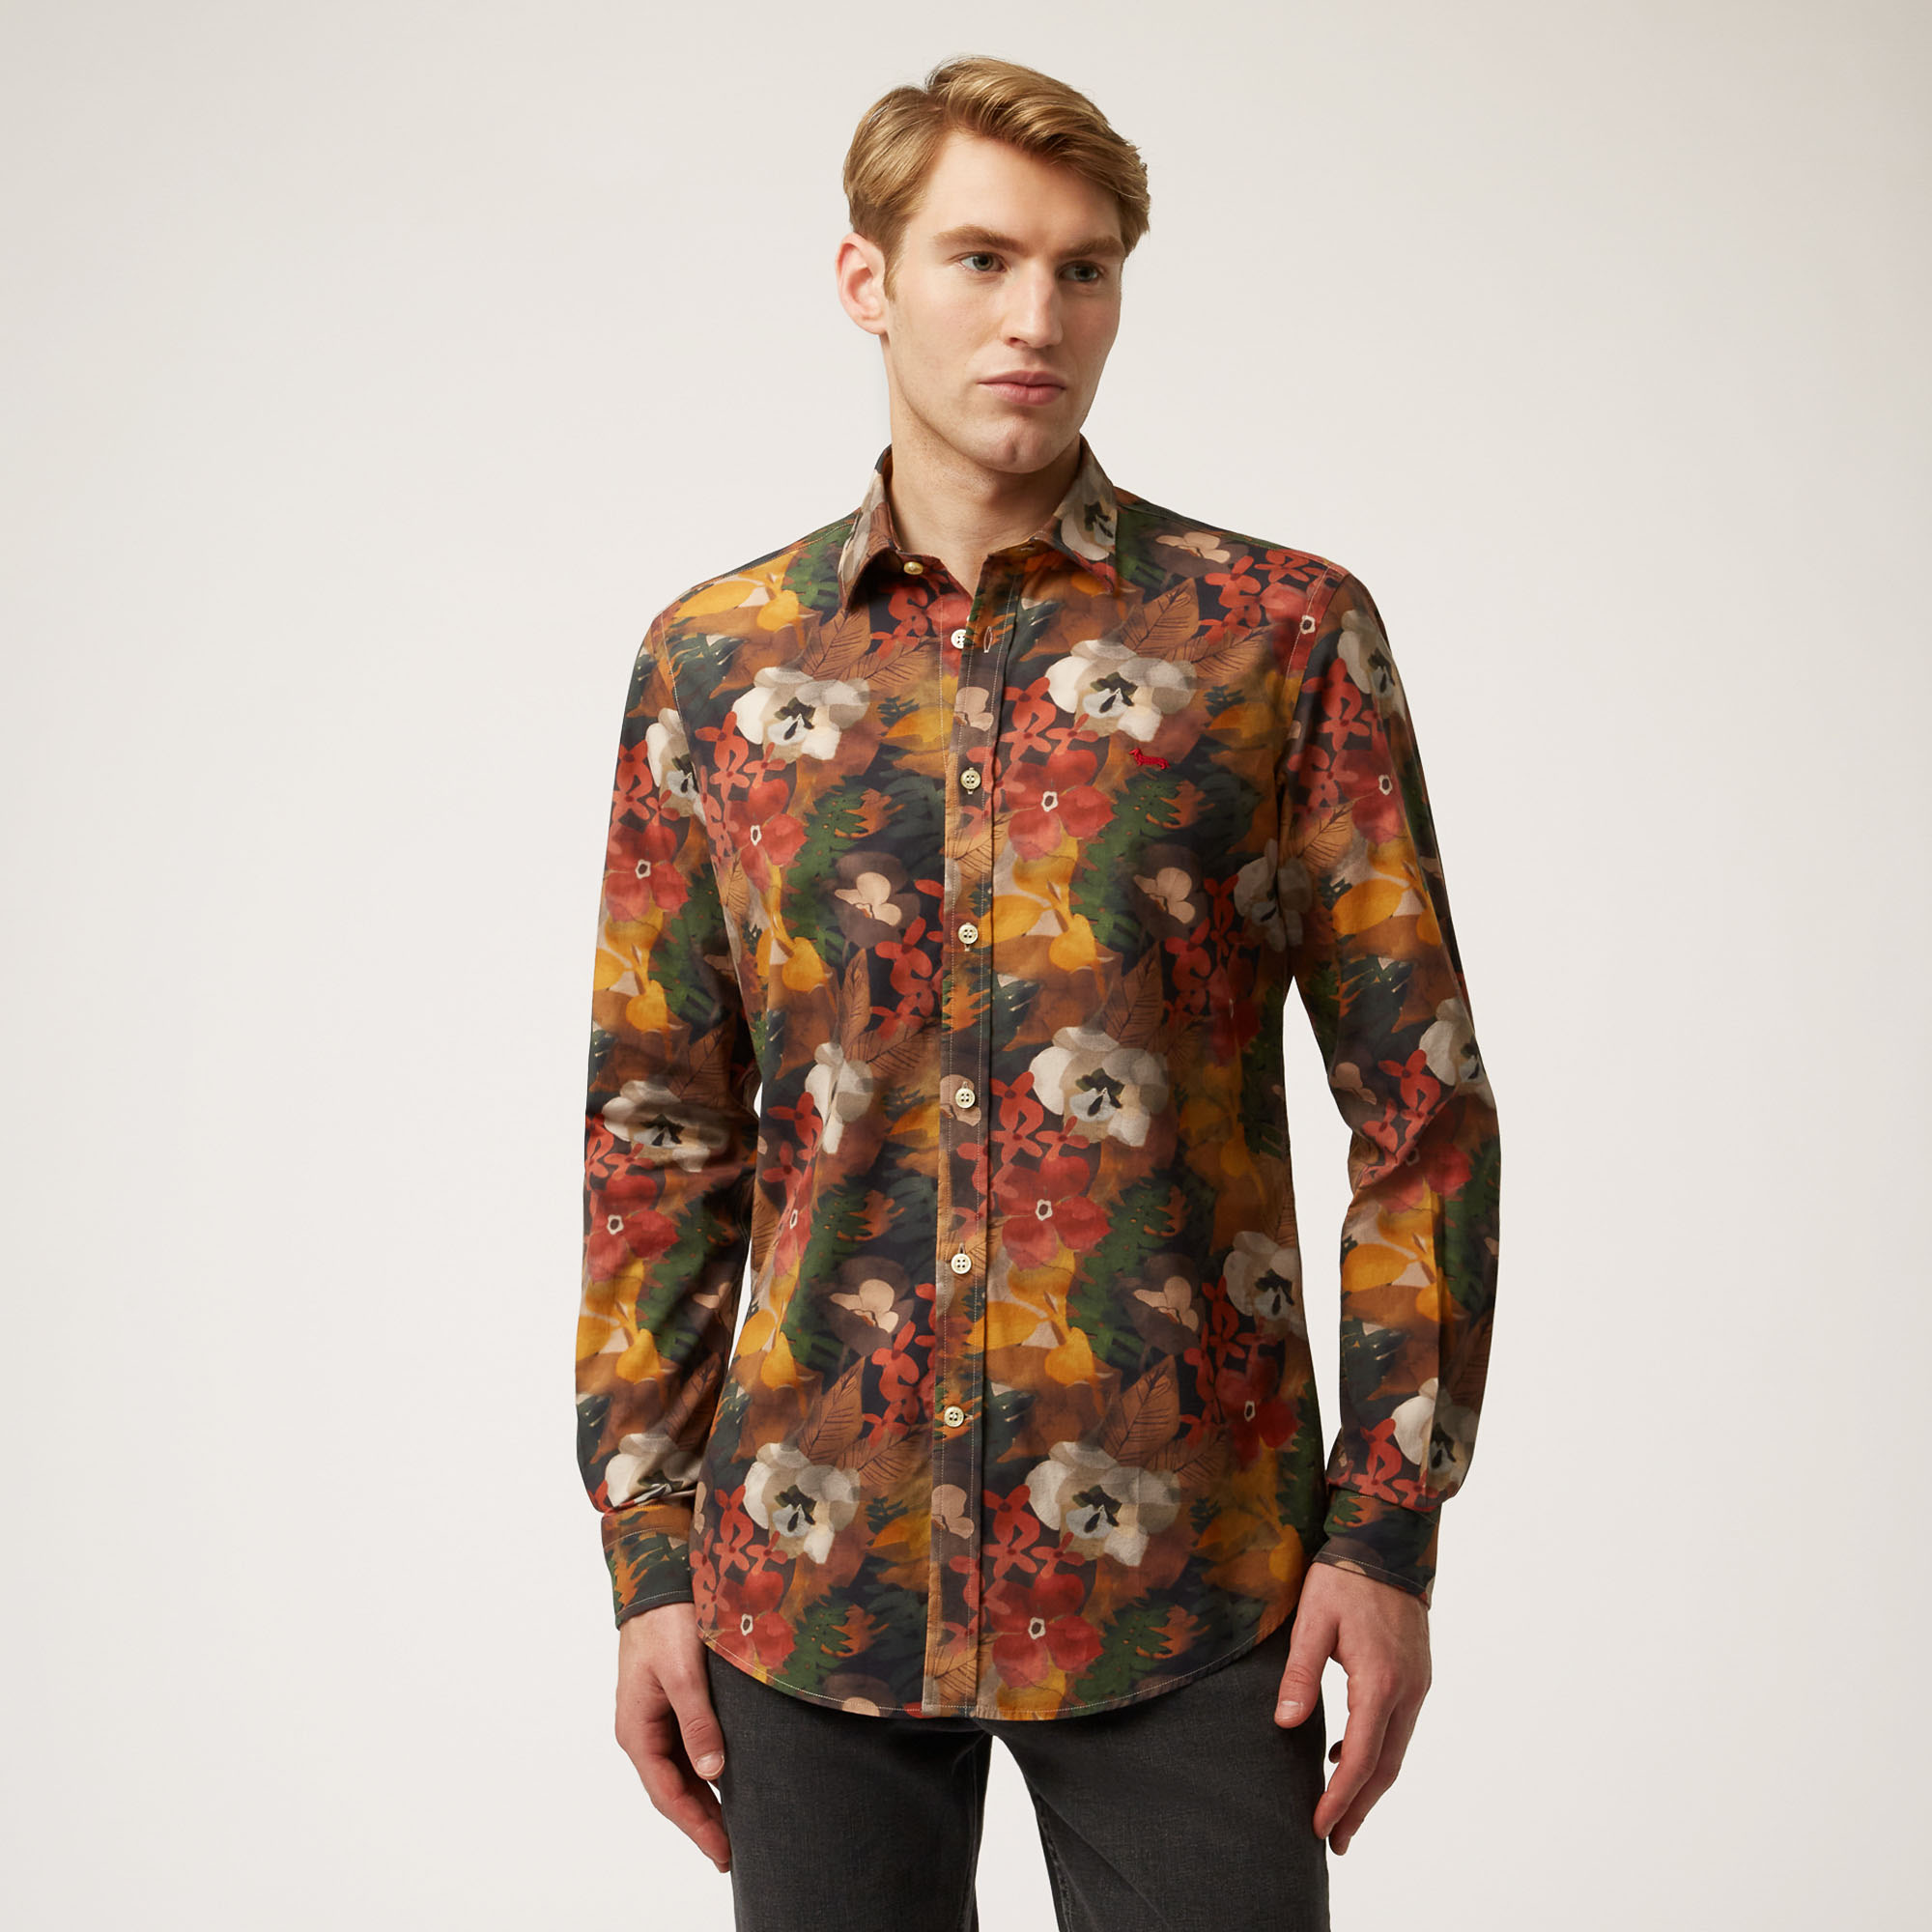 Cotton Shirt With Floral Pattern